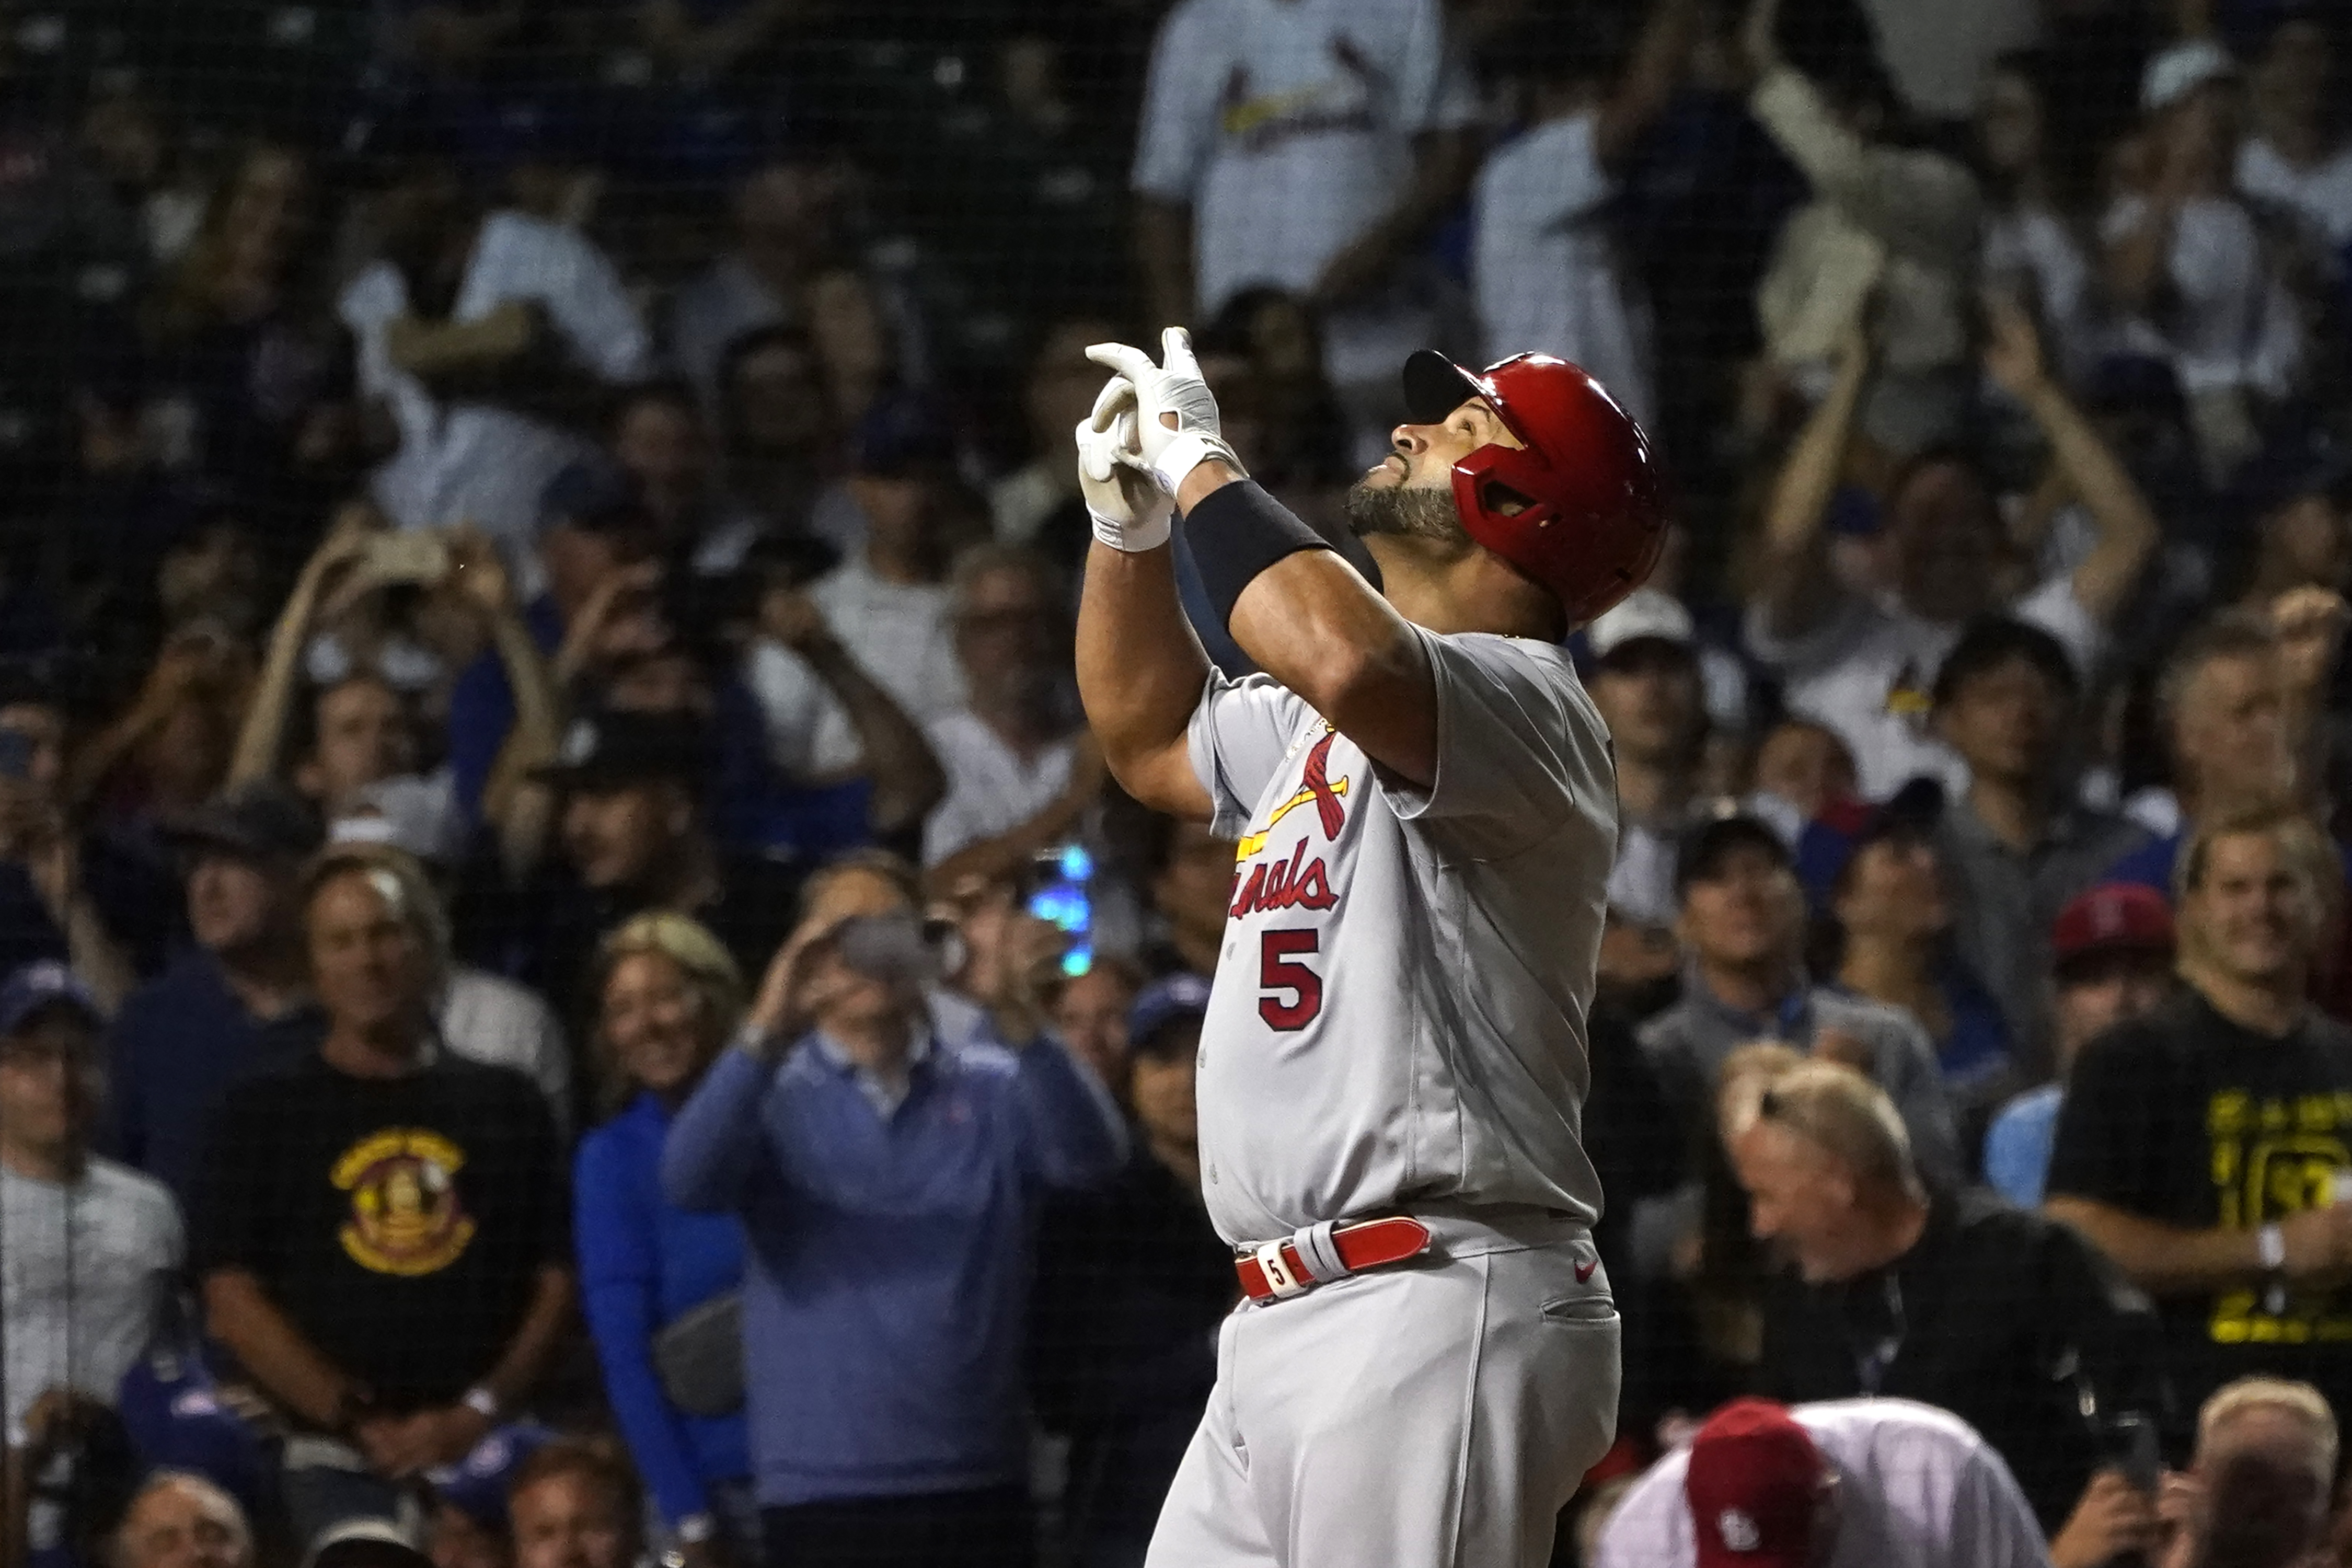 Albert Pujols gives young fan his Cardinals jersey after Cubs game